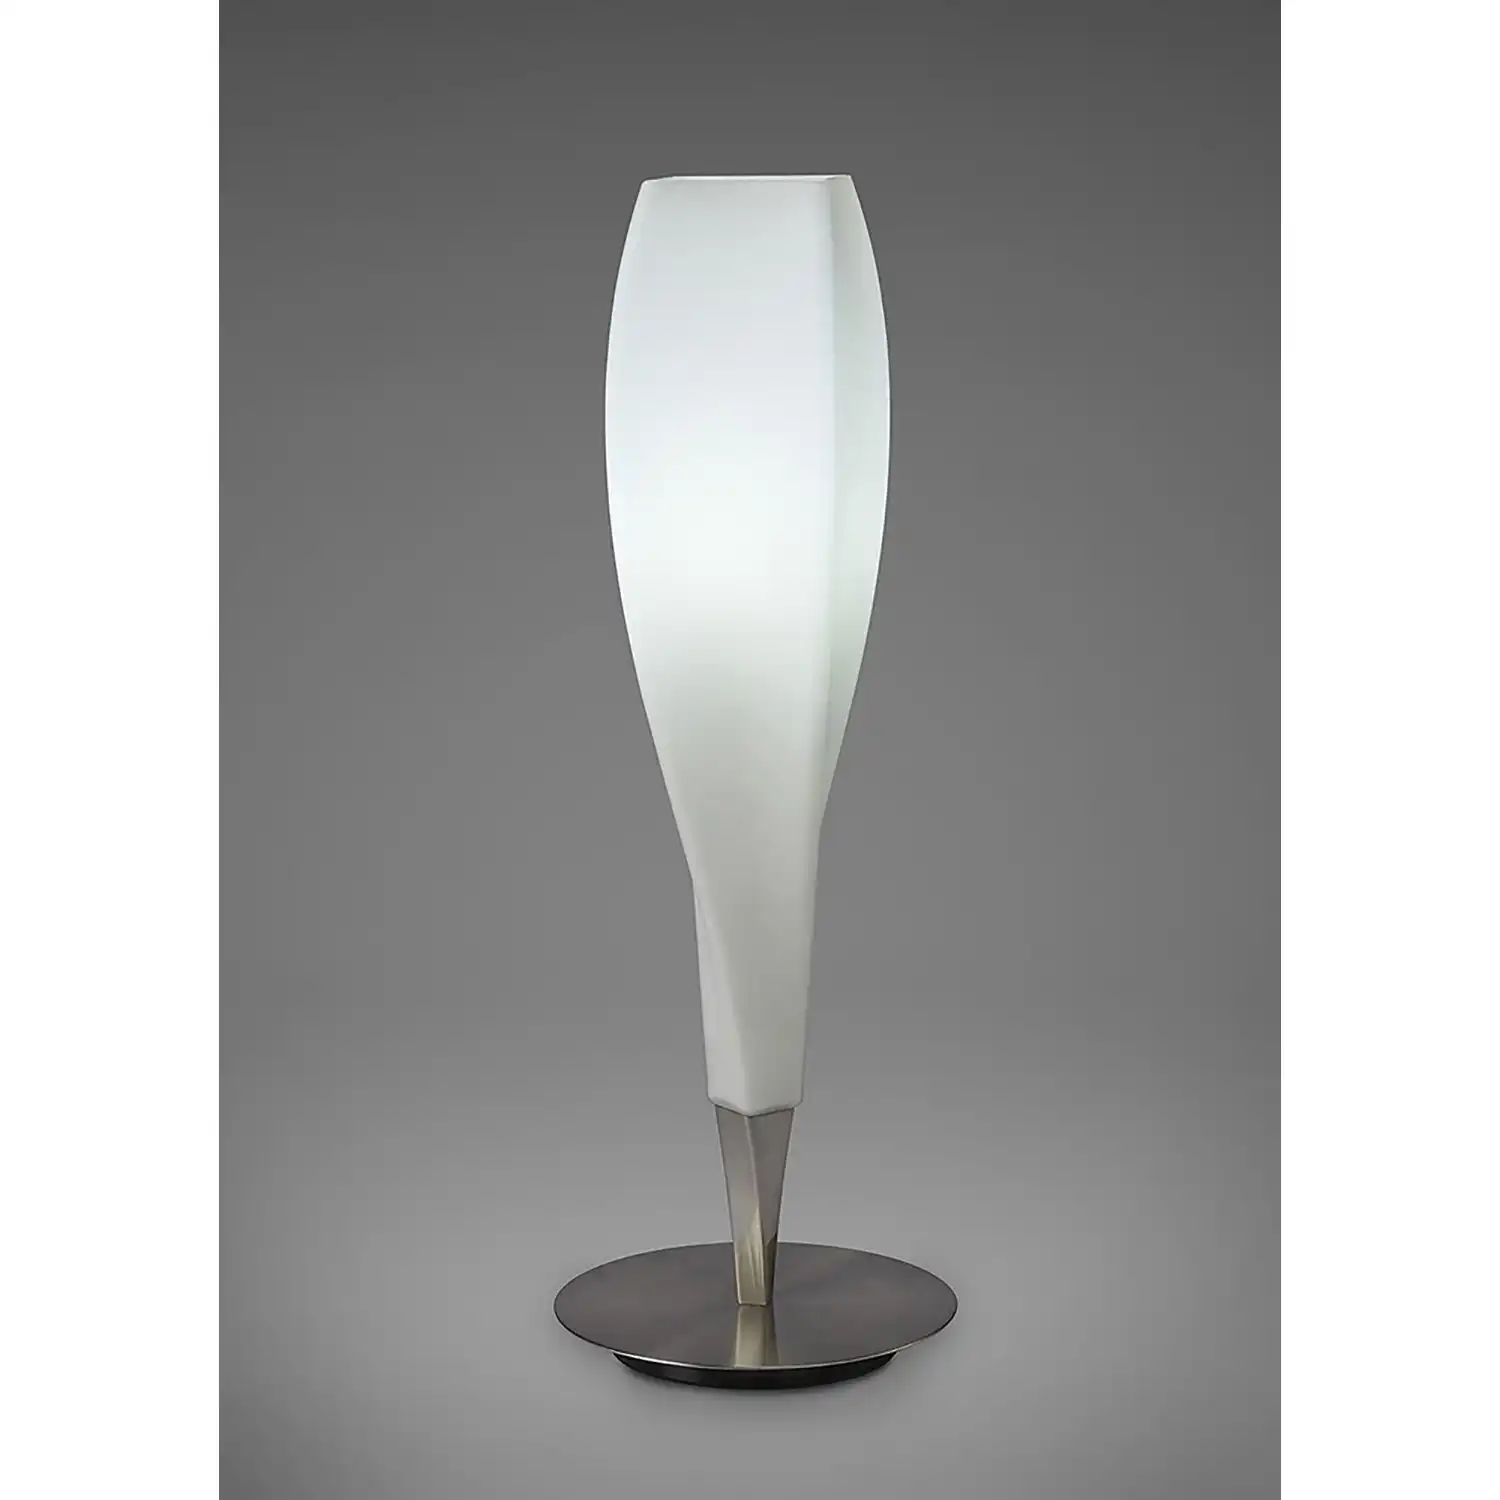 Neo Table Lamp 1 Light E27, Satin Nickel Frosted White Glass